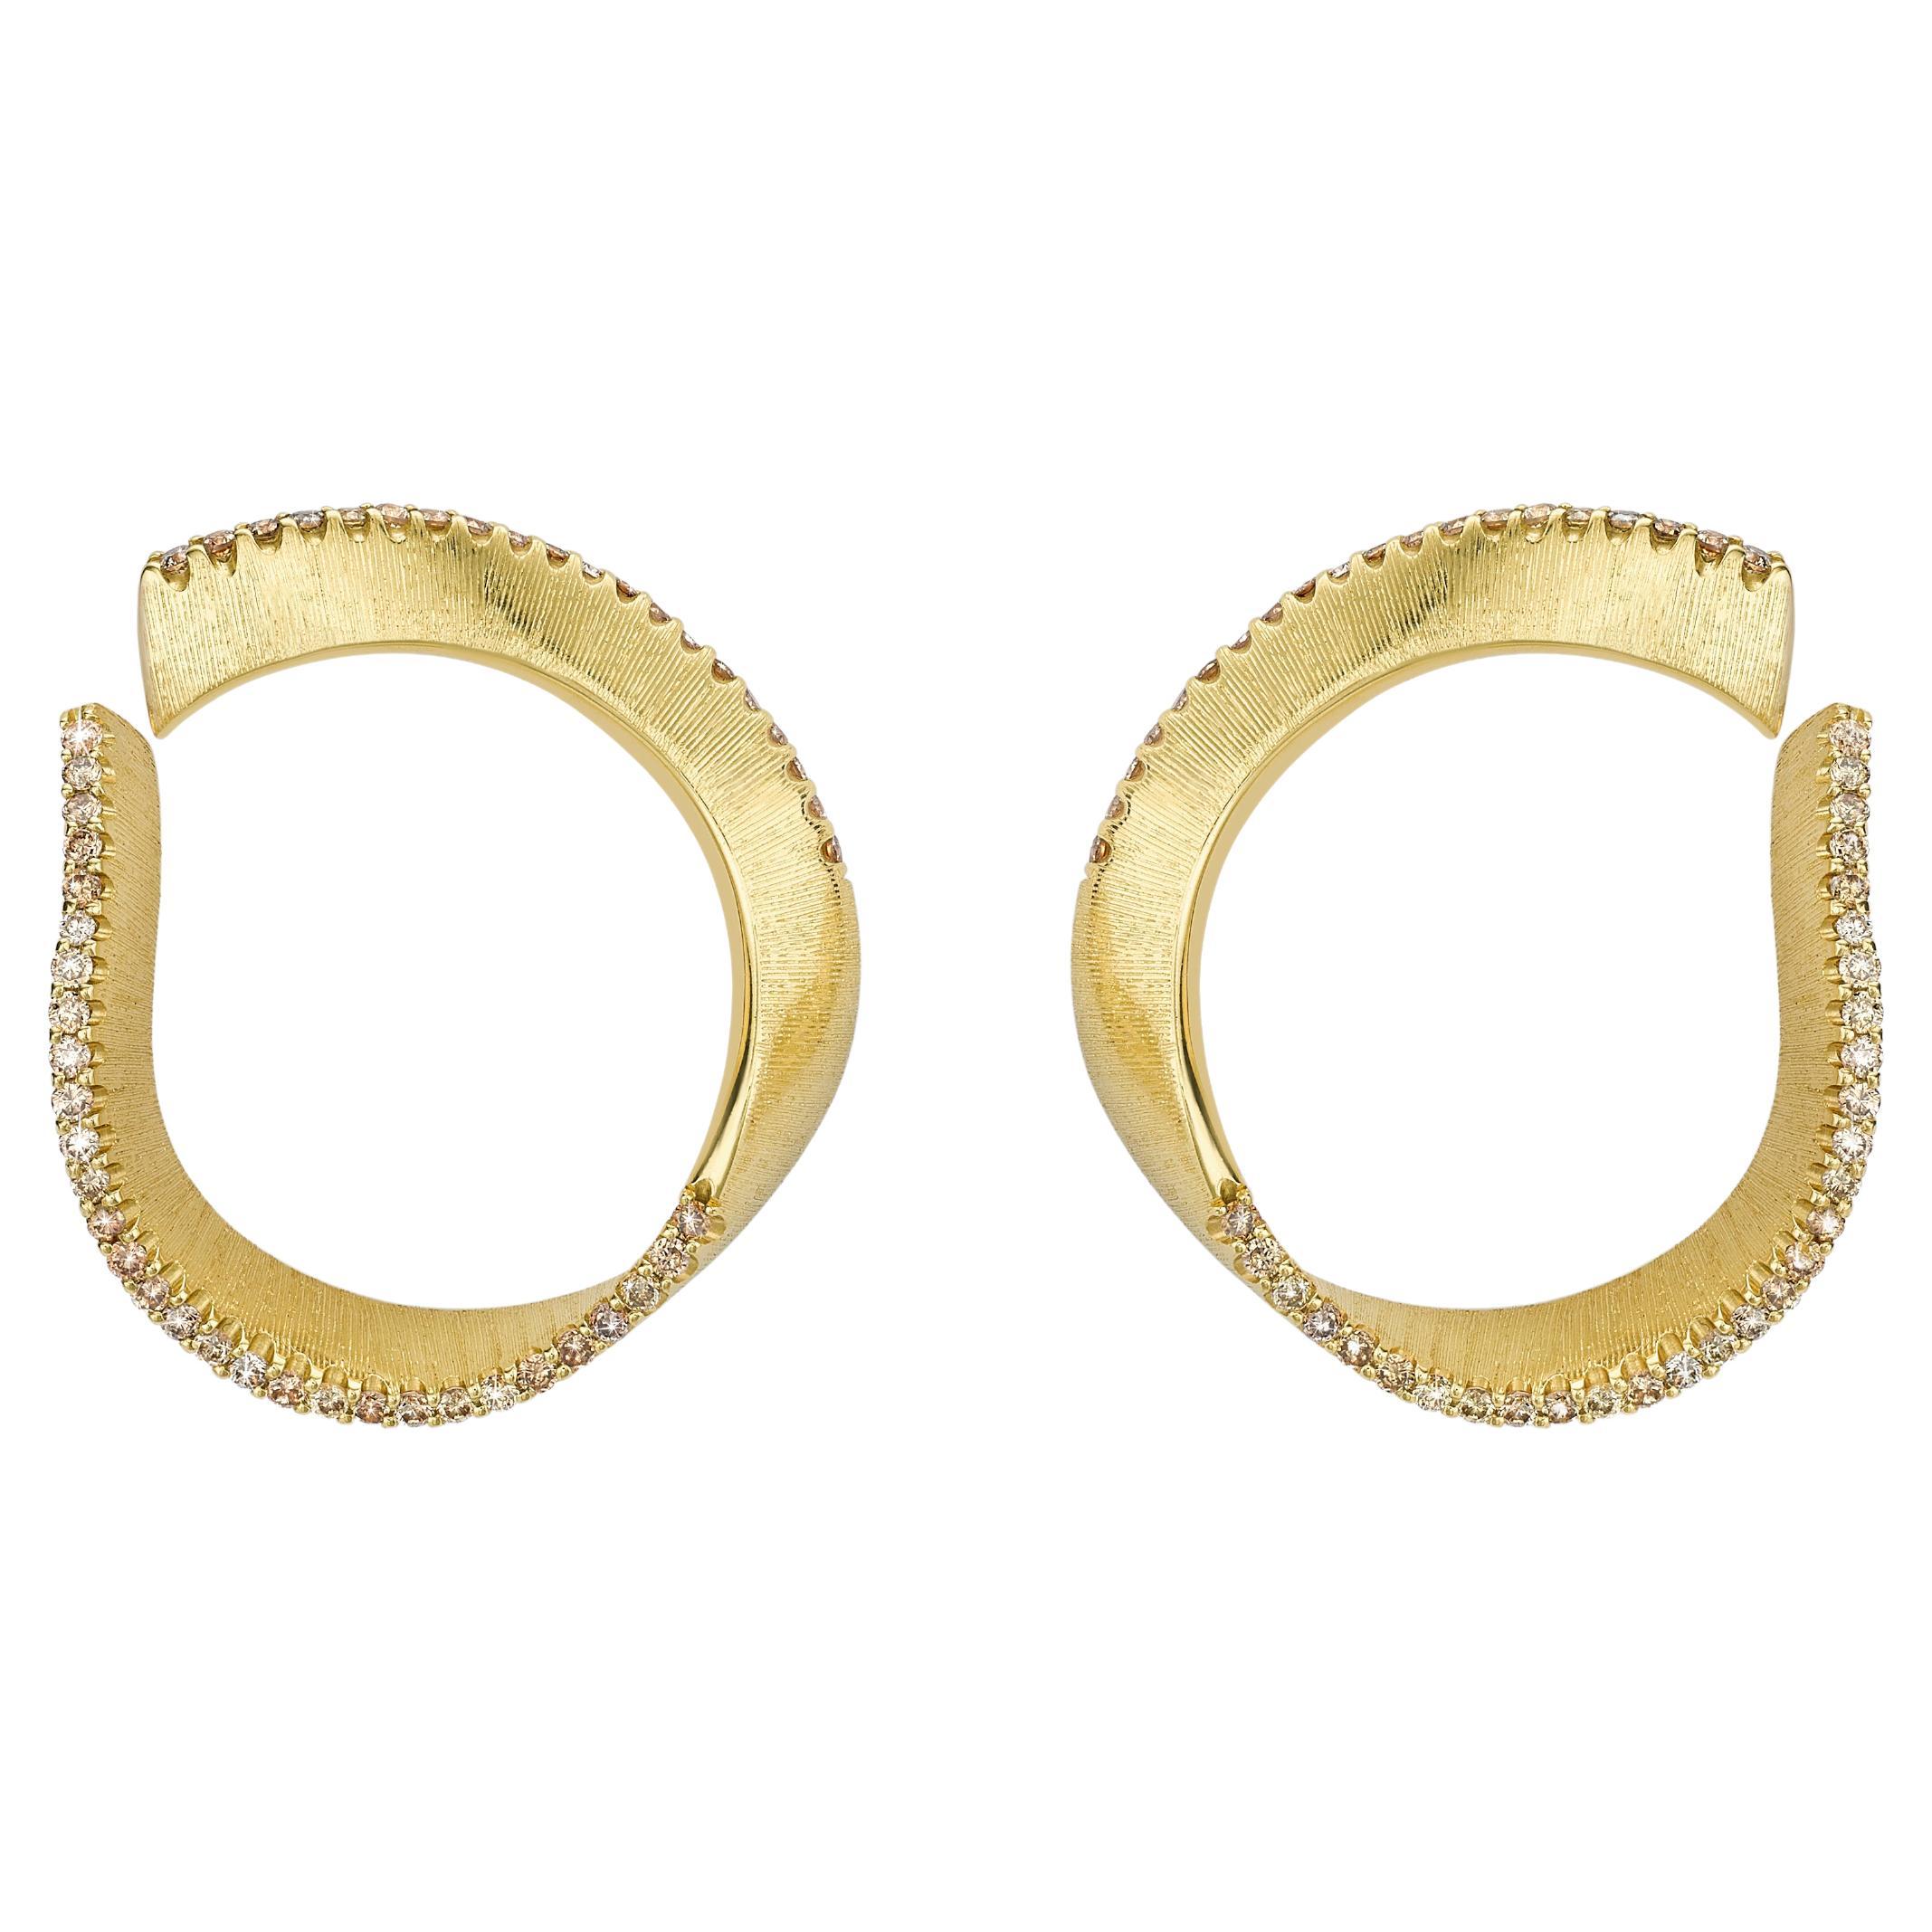 TWIST HOOP EARRINGS  Yellow gold with a warm-tone diamond edge by Liv Luttrell